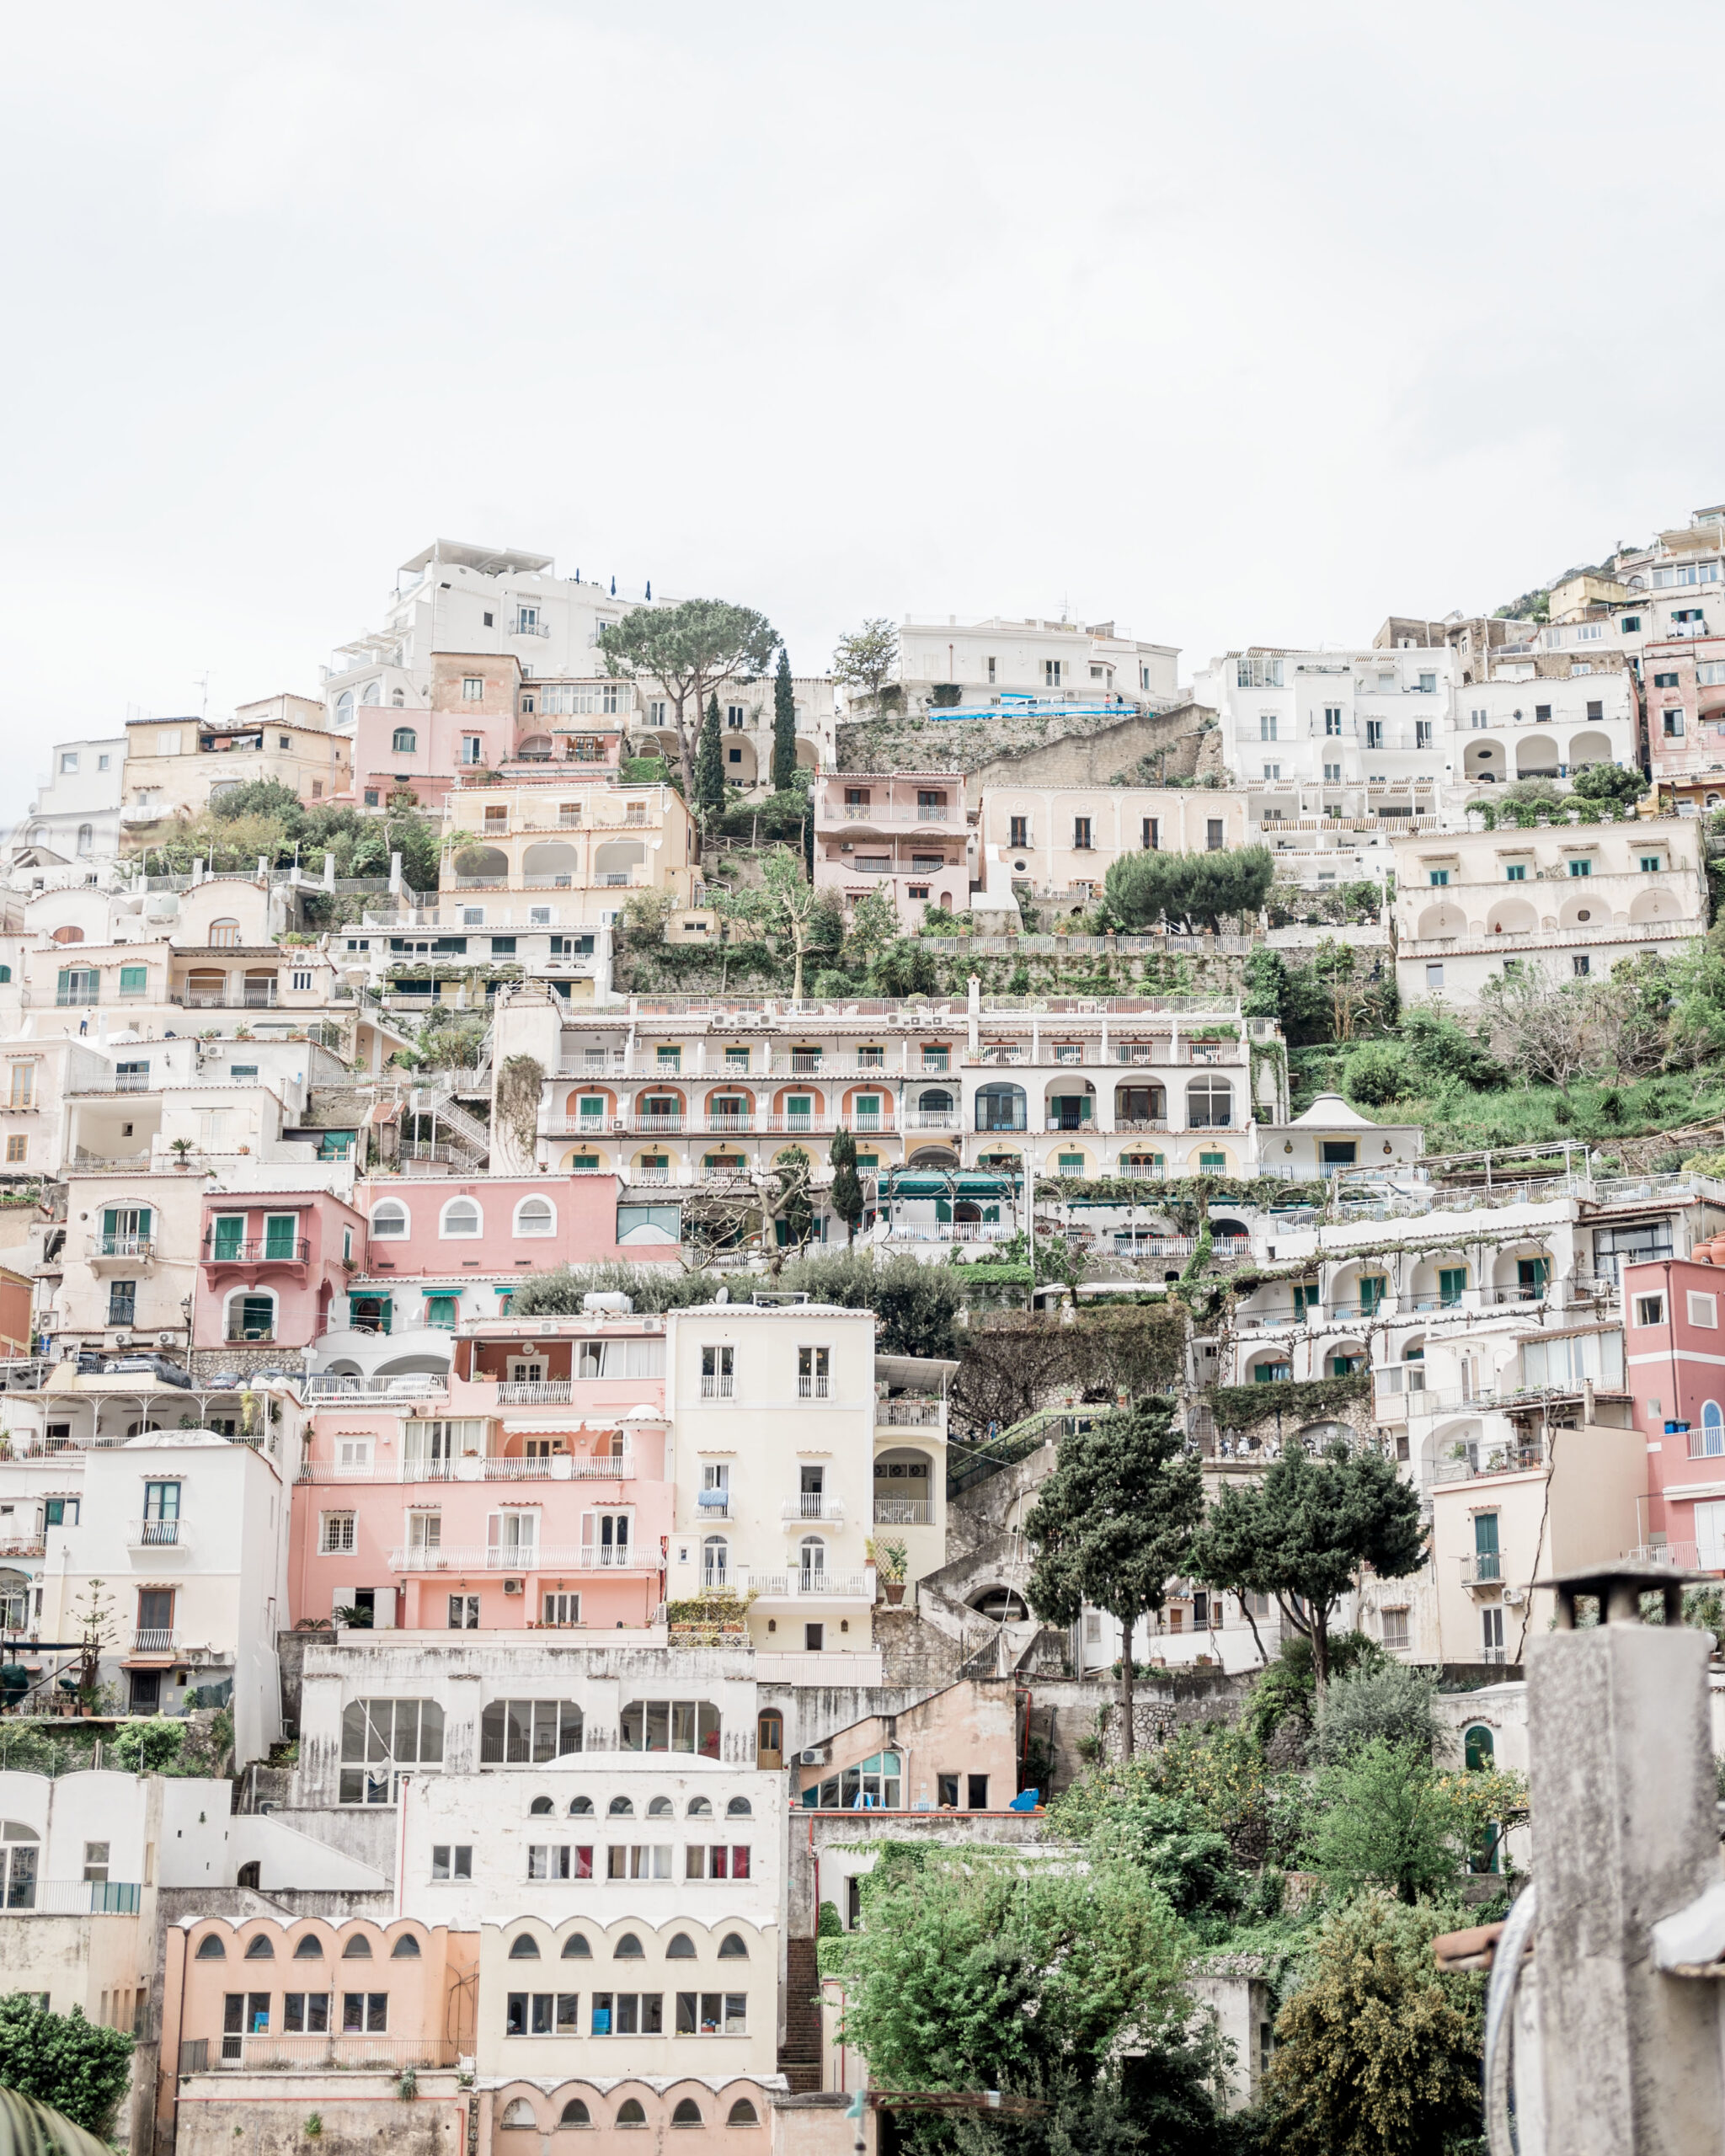 Hotel Poseidon pictured amongst other buildings on the hillside of Positano, luxurious hotel